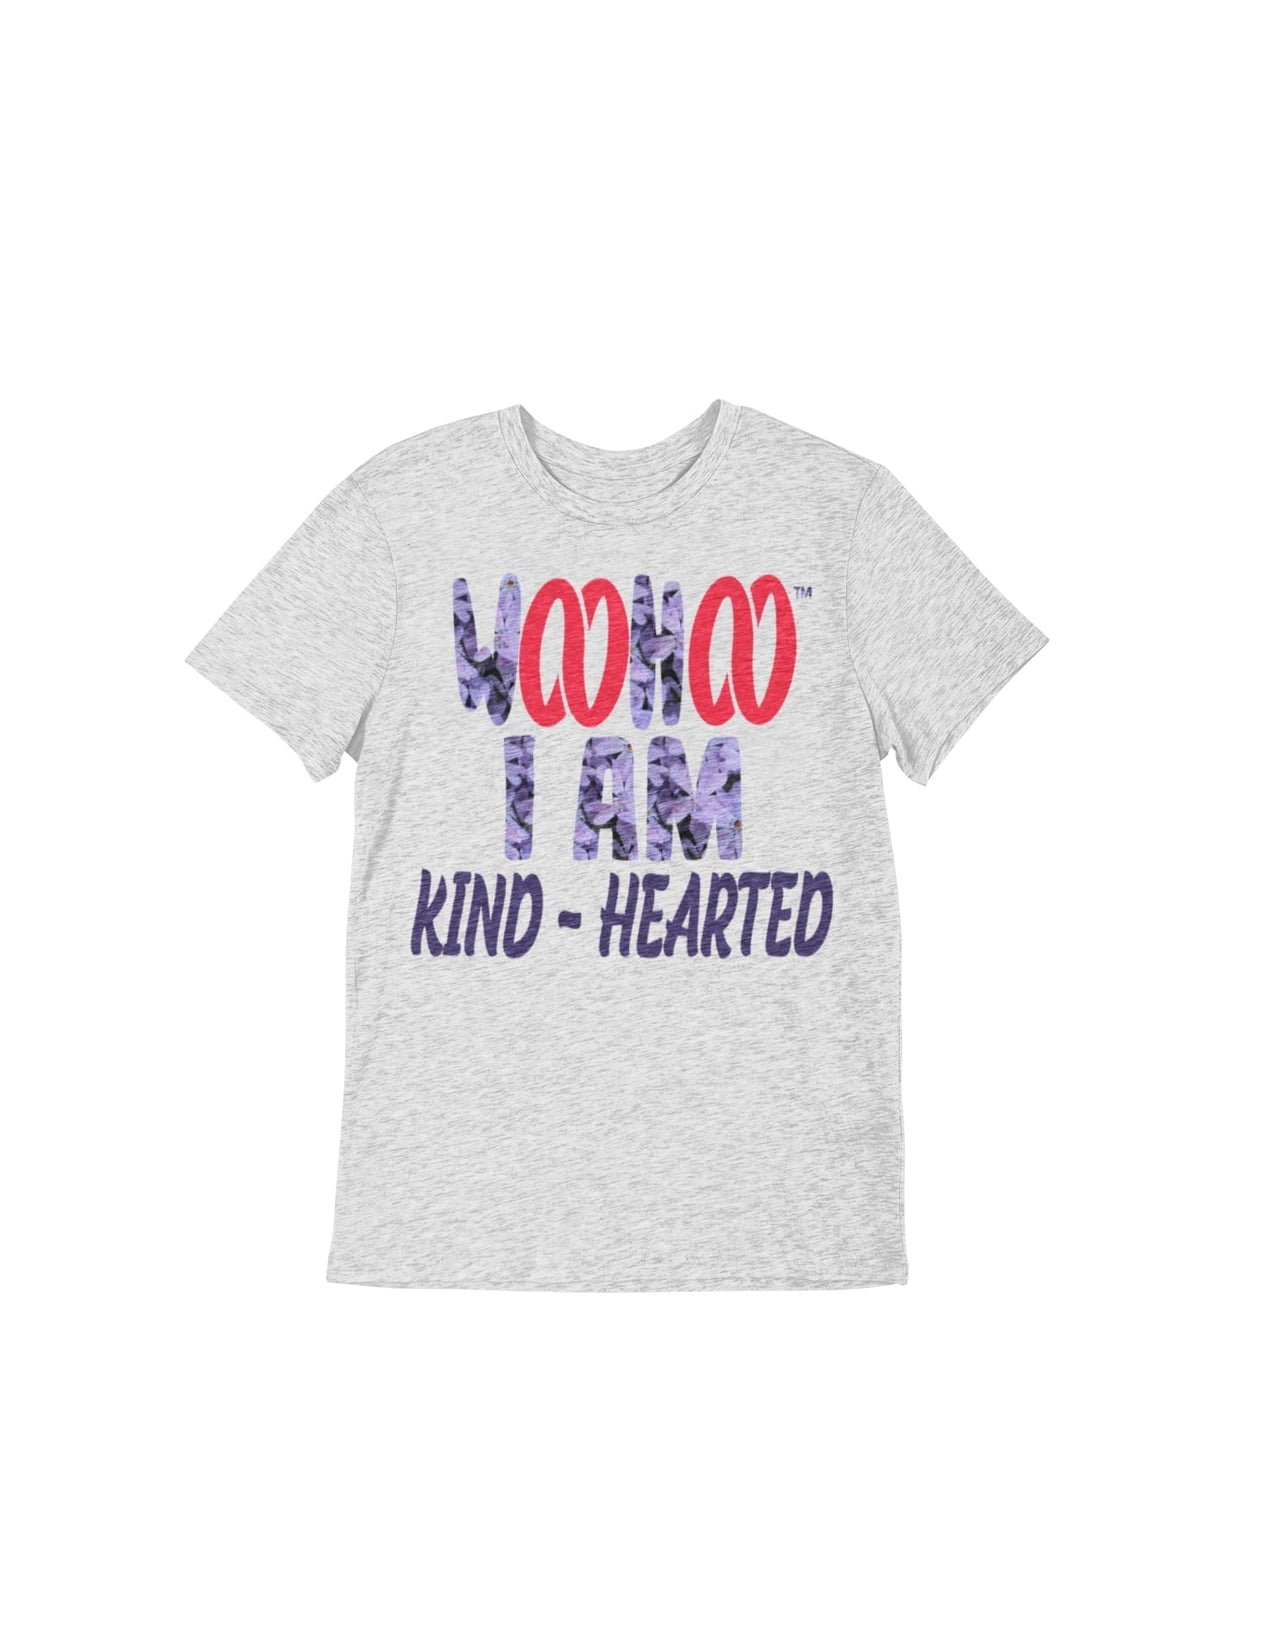 Heather Gray Unisex T-shirt featuring the text 'WooHoo I Am Kind Hearted' in a cool font, designed by WooHoo Apparel.